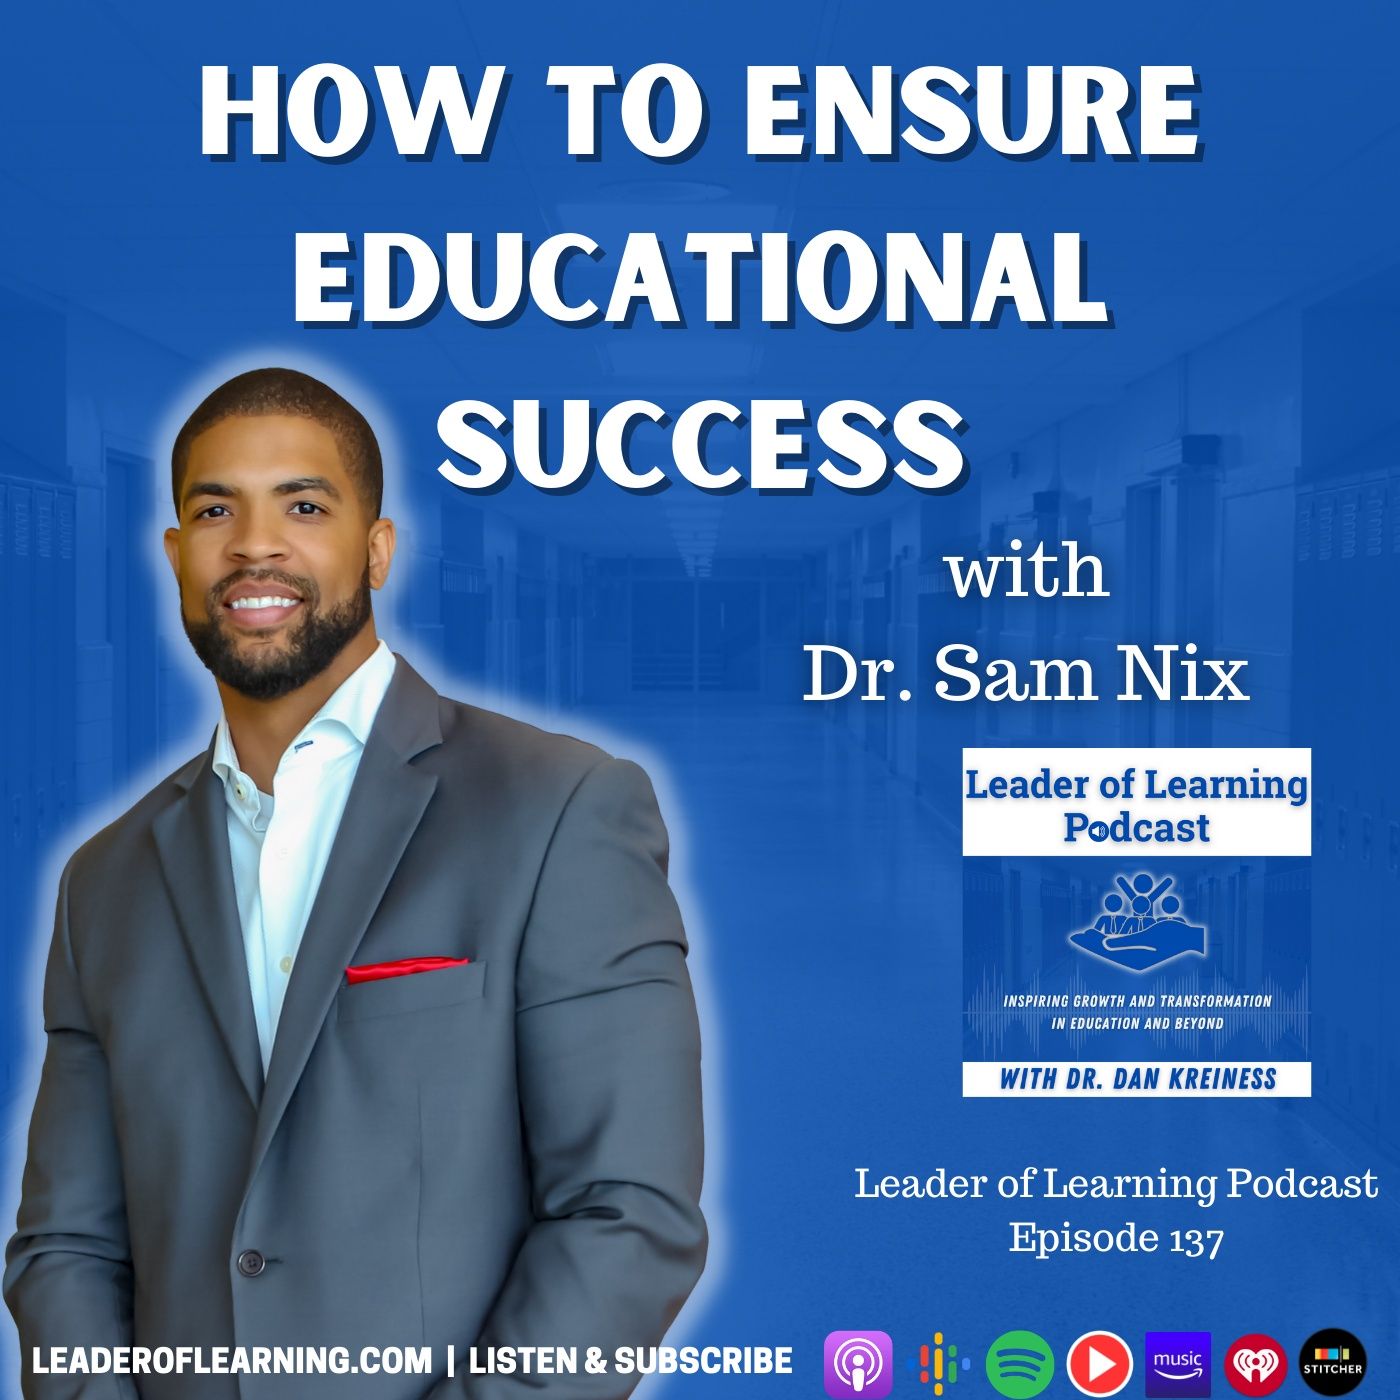 How to Ensure Educational Success with Dr. Sam Nix Image